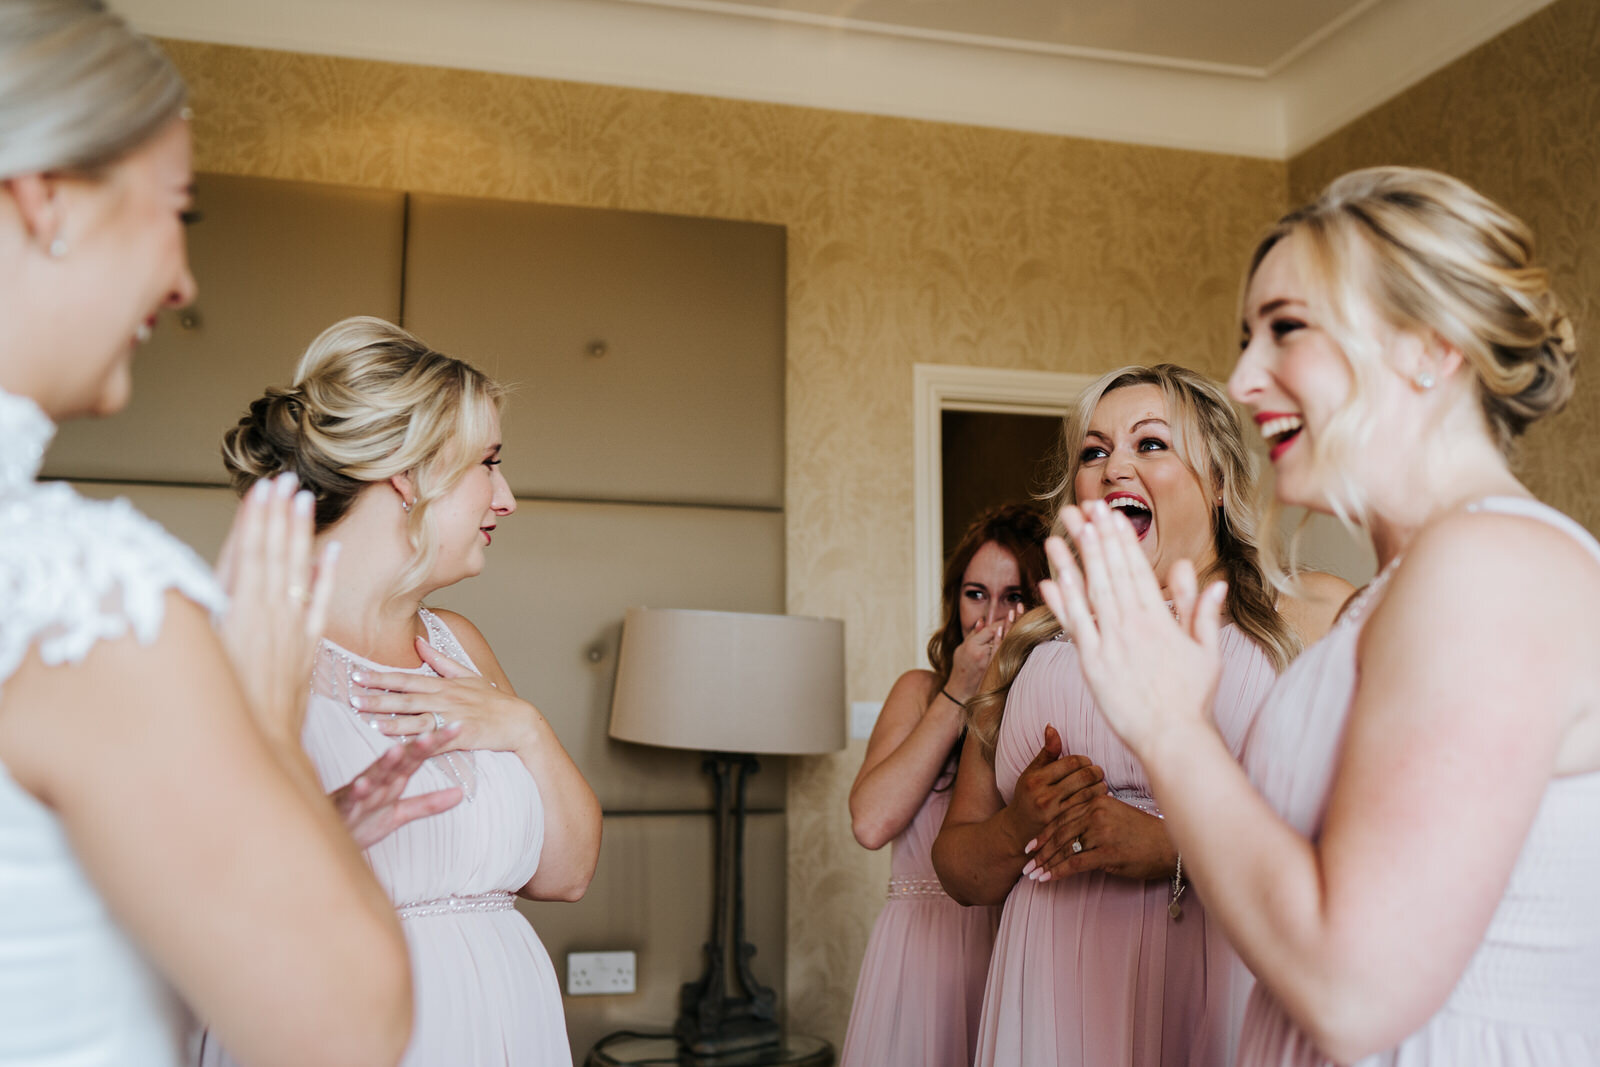 Bride and bridesmaids gather around each other and smile as they are excited for the wedding day ahead